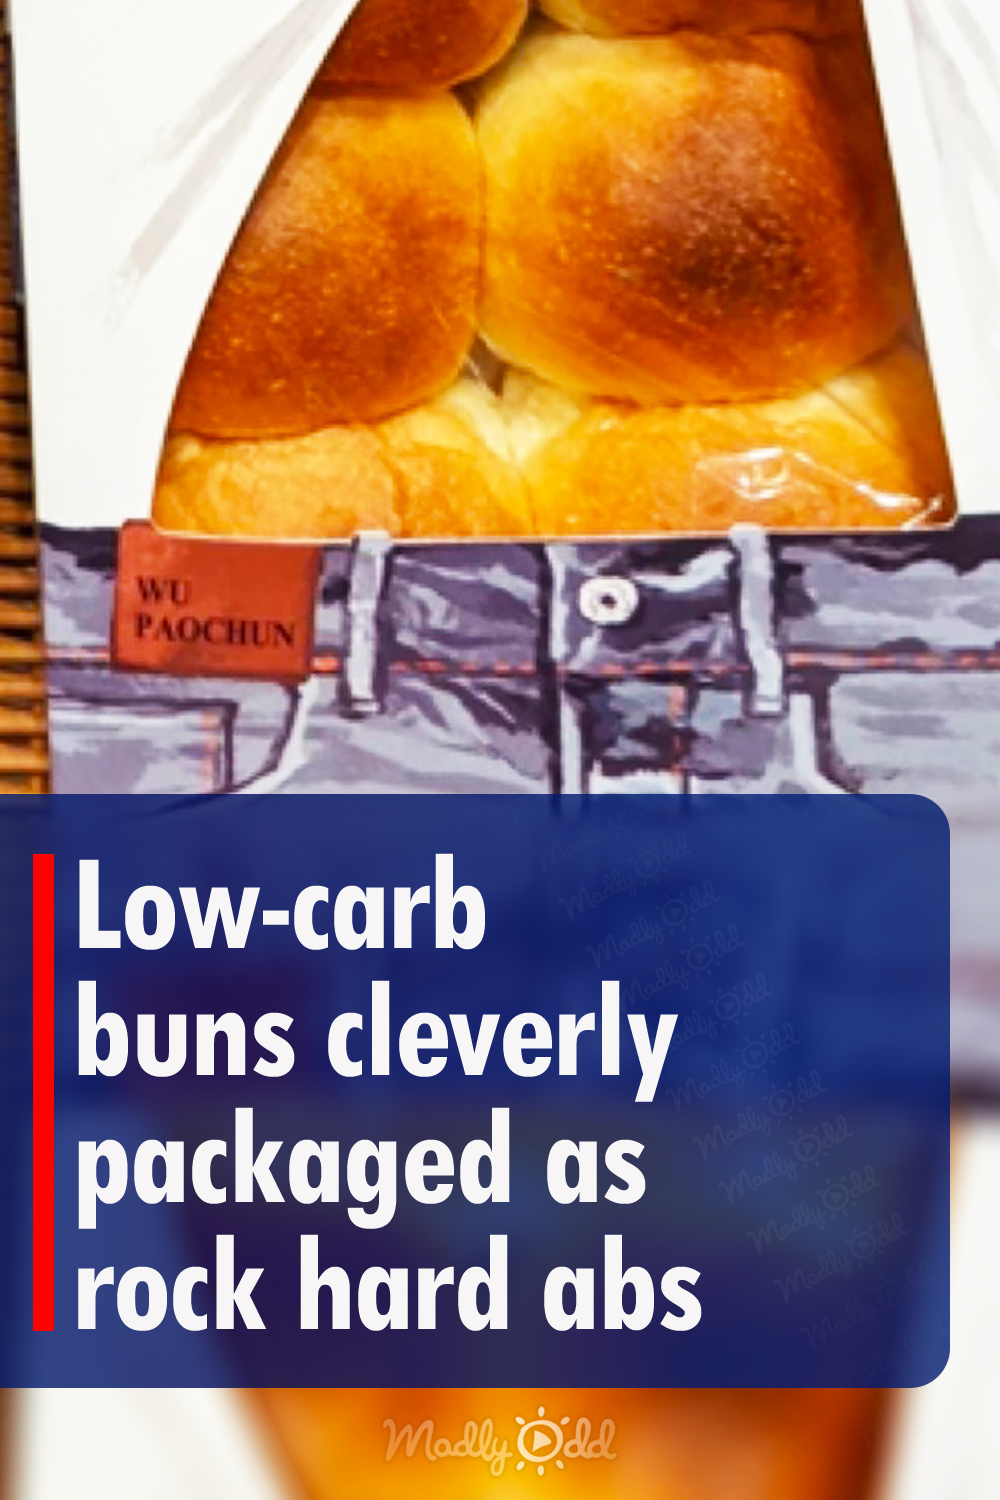 Low-carb buns cleverly packaged as rock hard abs